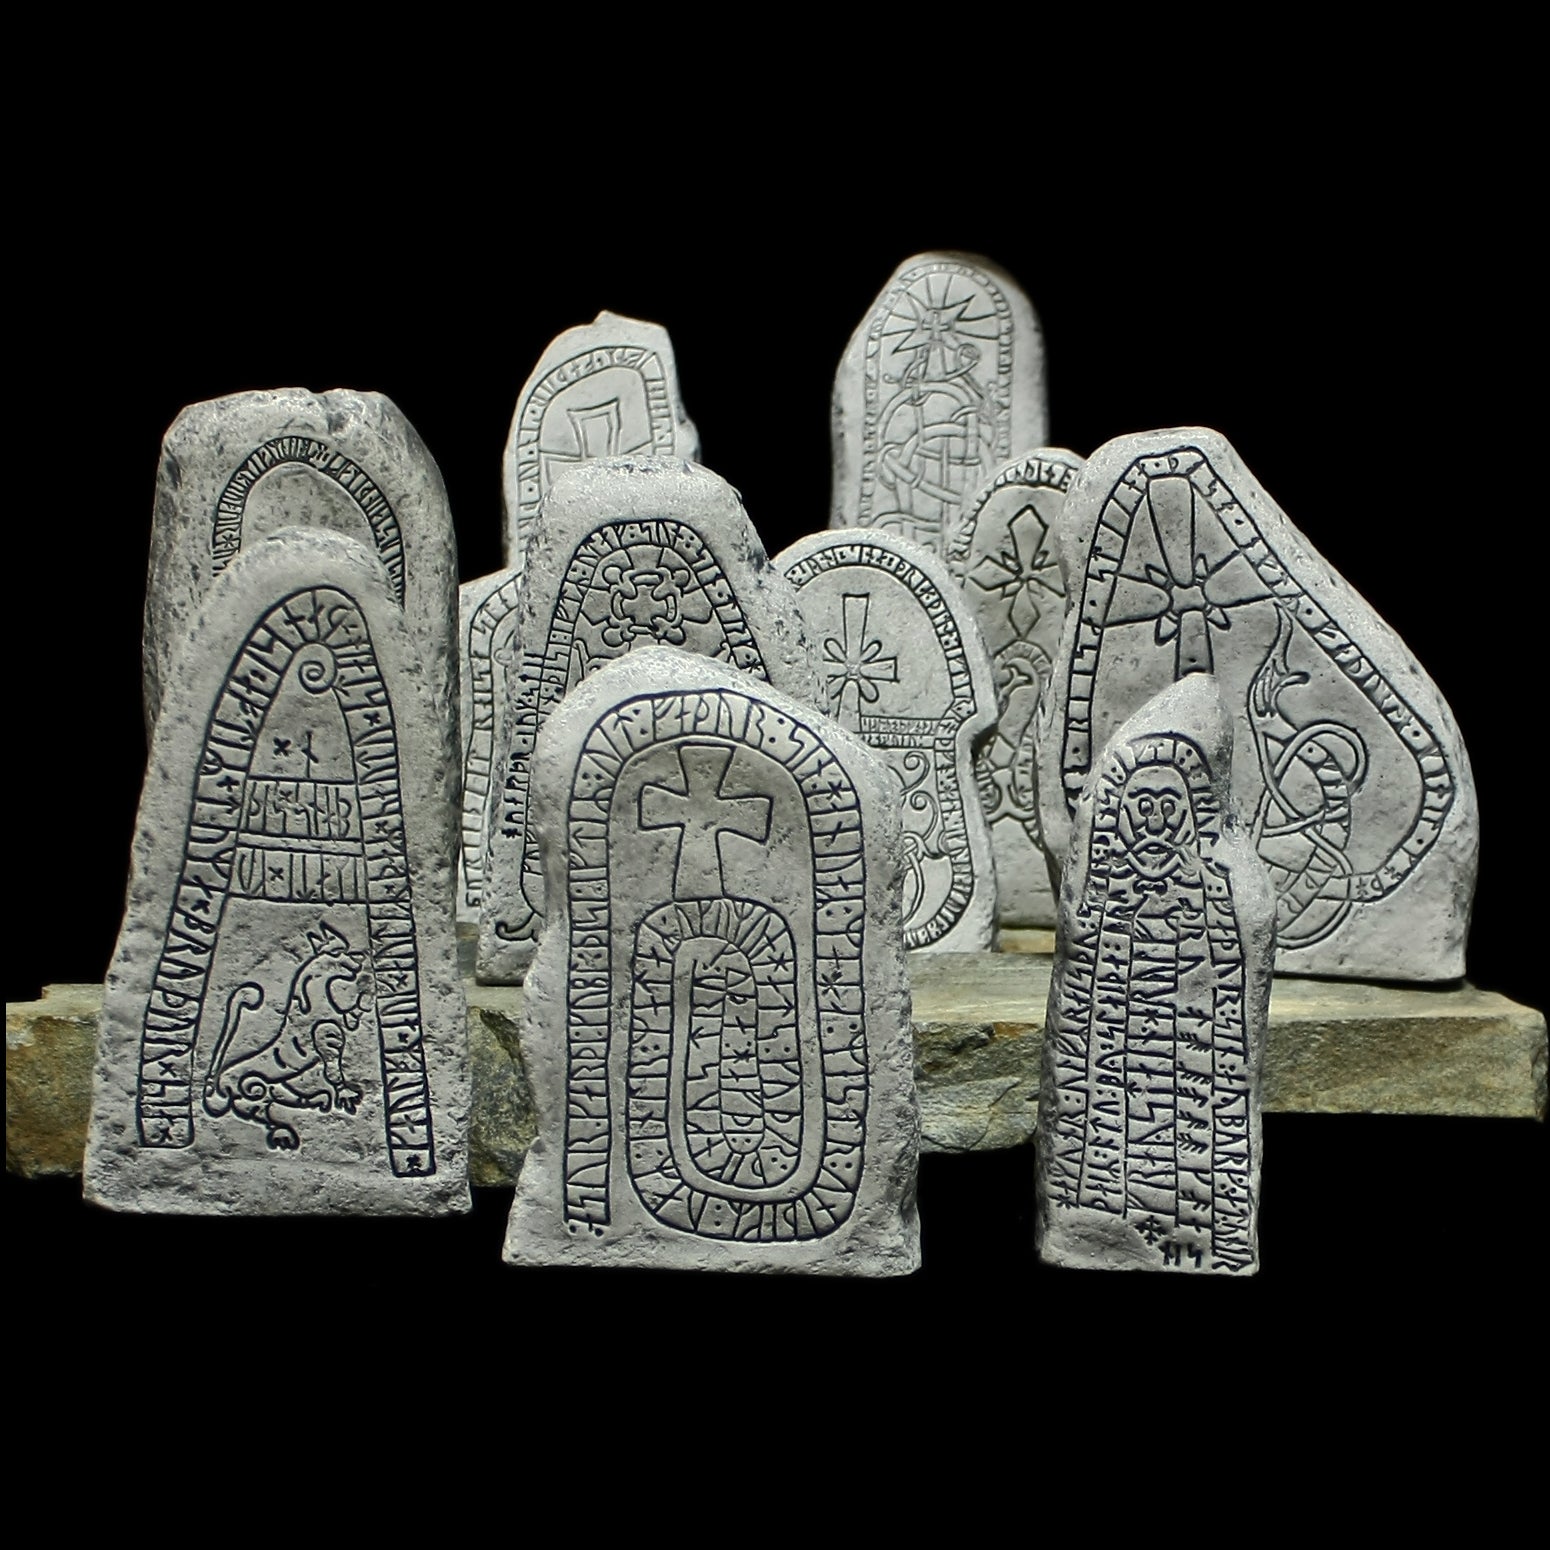 stone carving tattoos